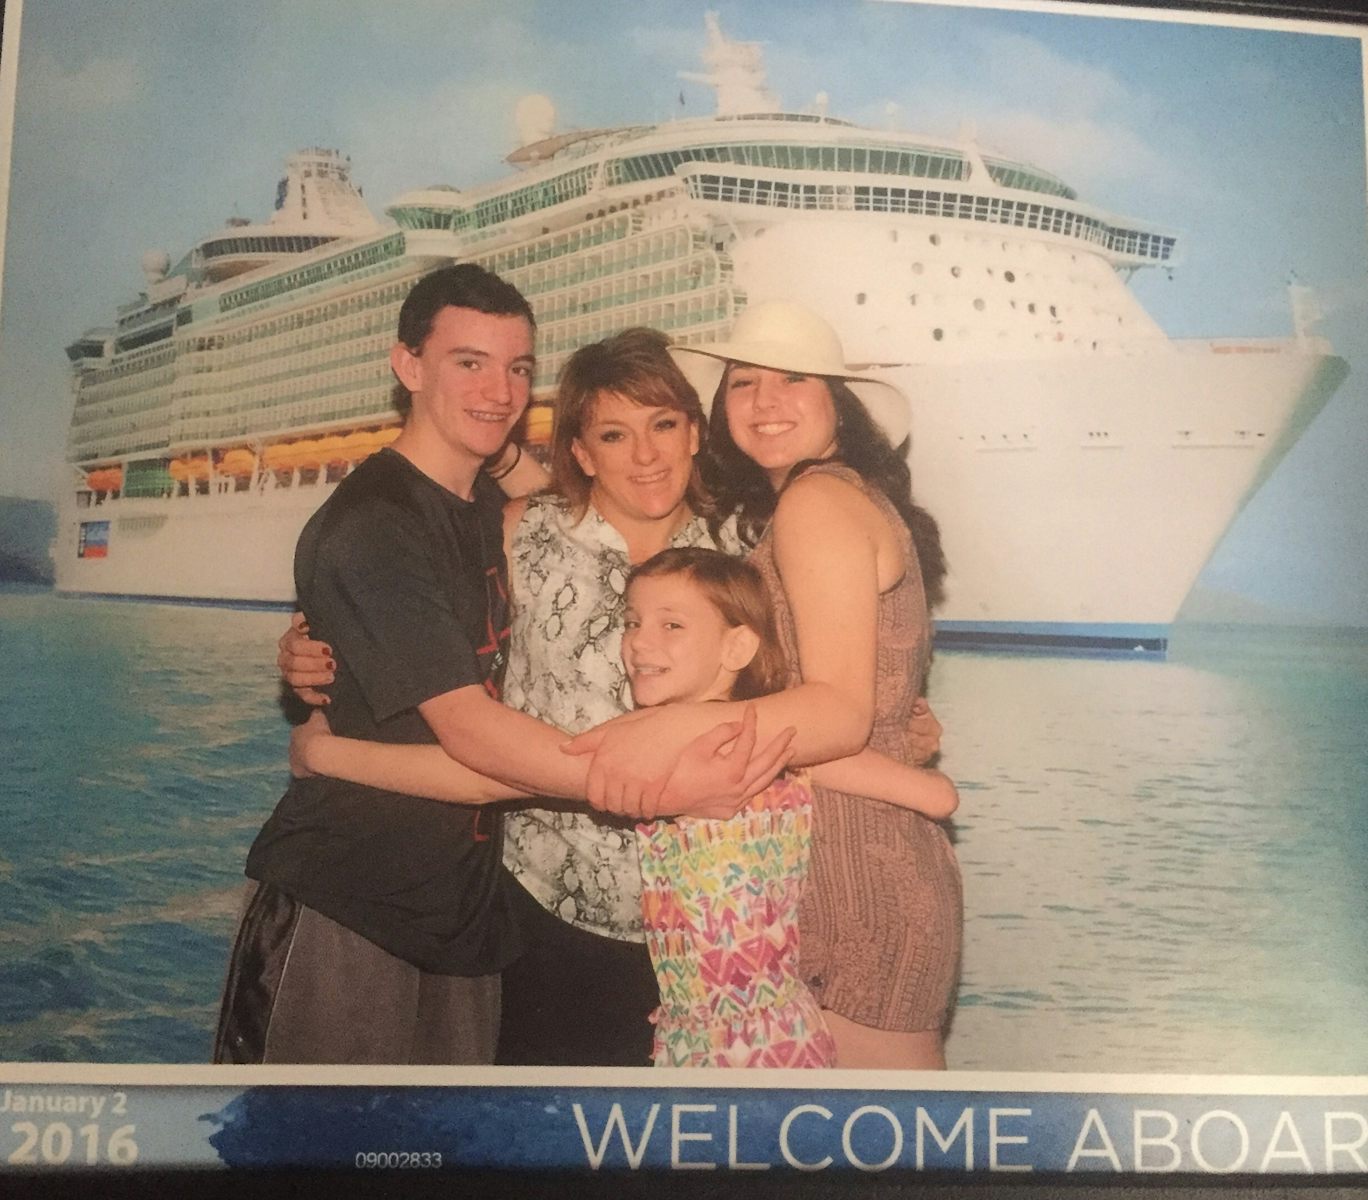 The cruise was amazing. My family and I did not think we would enjoy it but it was our first cruise and it was well worth the money. We left from Fort Lauderdale and it was a great port to leave from as we also got to spend some time in Florida. The ship was big and beautiful. My family did the Acapella group which is not always apart of the cruise but it was a great experience especially because we were able to fellowship with other christians. 
  We arrived early on the ship which allowed us to see it and hang out and admire Deck 11 which was the pool area. Deck 12 is basketball, rock climbing, and the surf activity which is a great experience. The cabins were great we had two because there was four of us but they were well sized and the beds are very comfortable. The spa is definitely a place to relax. I had a pedicure and my mom got a massage and both were great except we decided to do it before we left for our off shore excursion which was not a good idea. The fitness center look